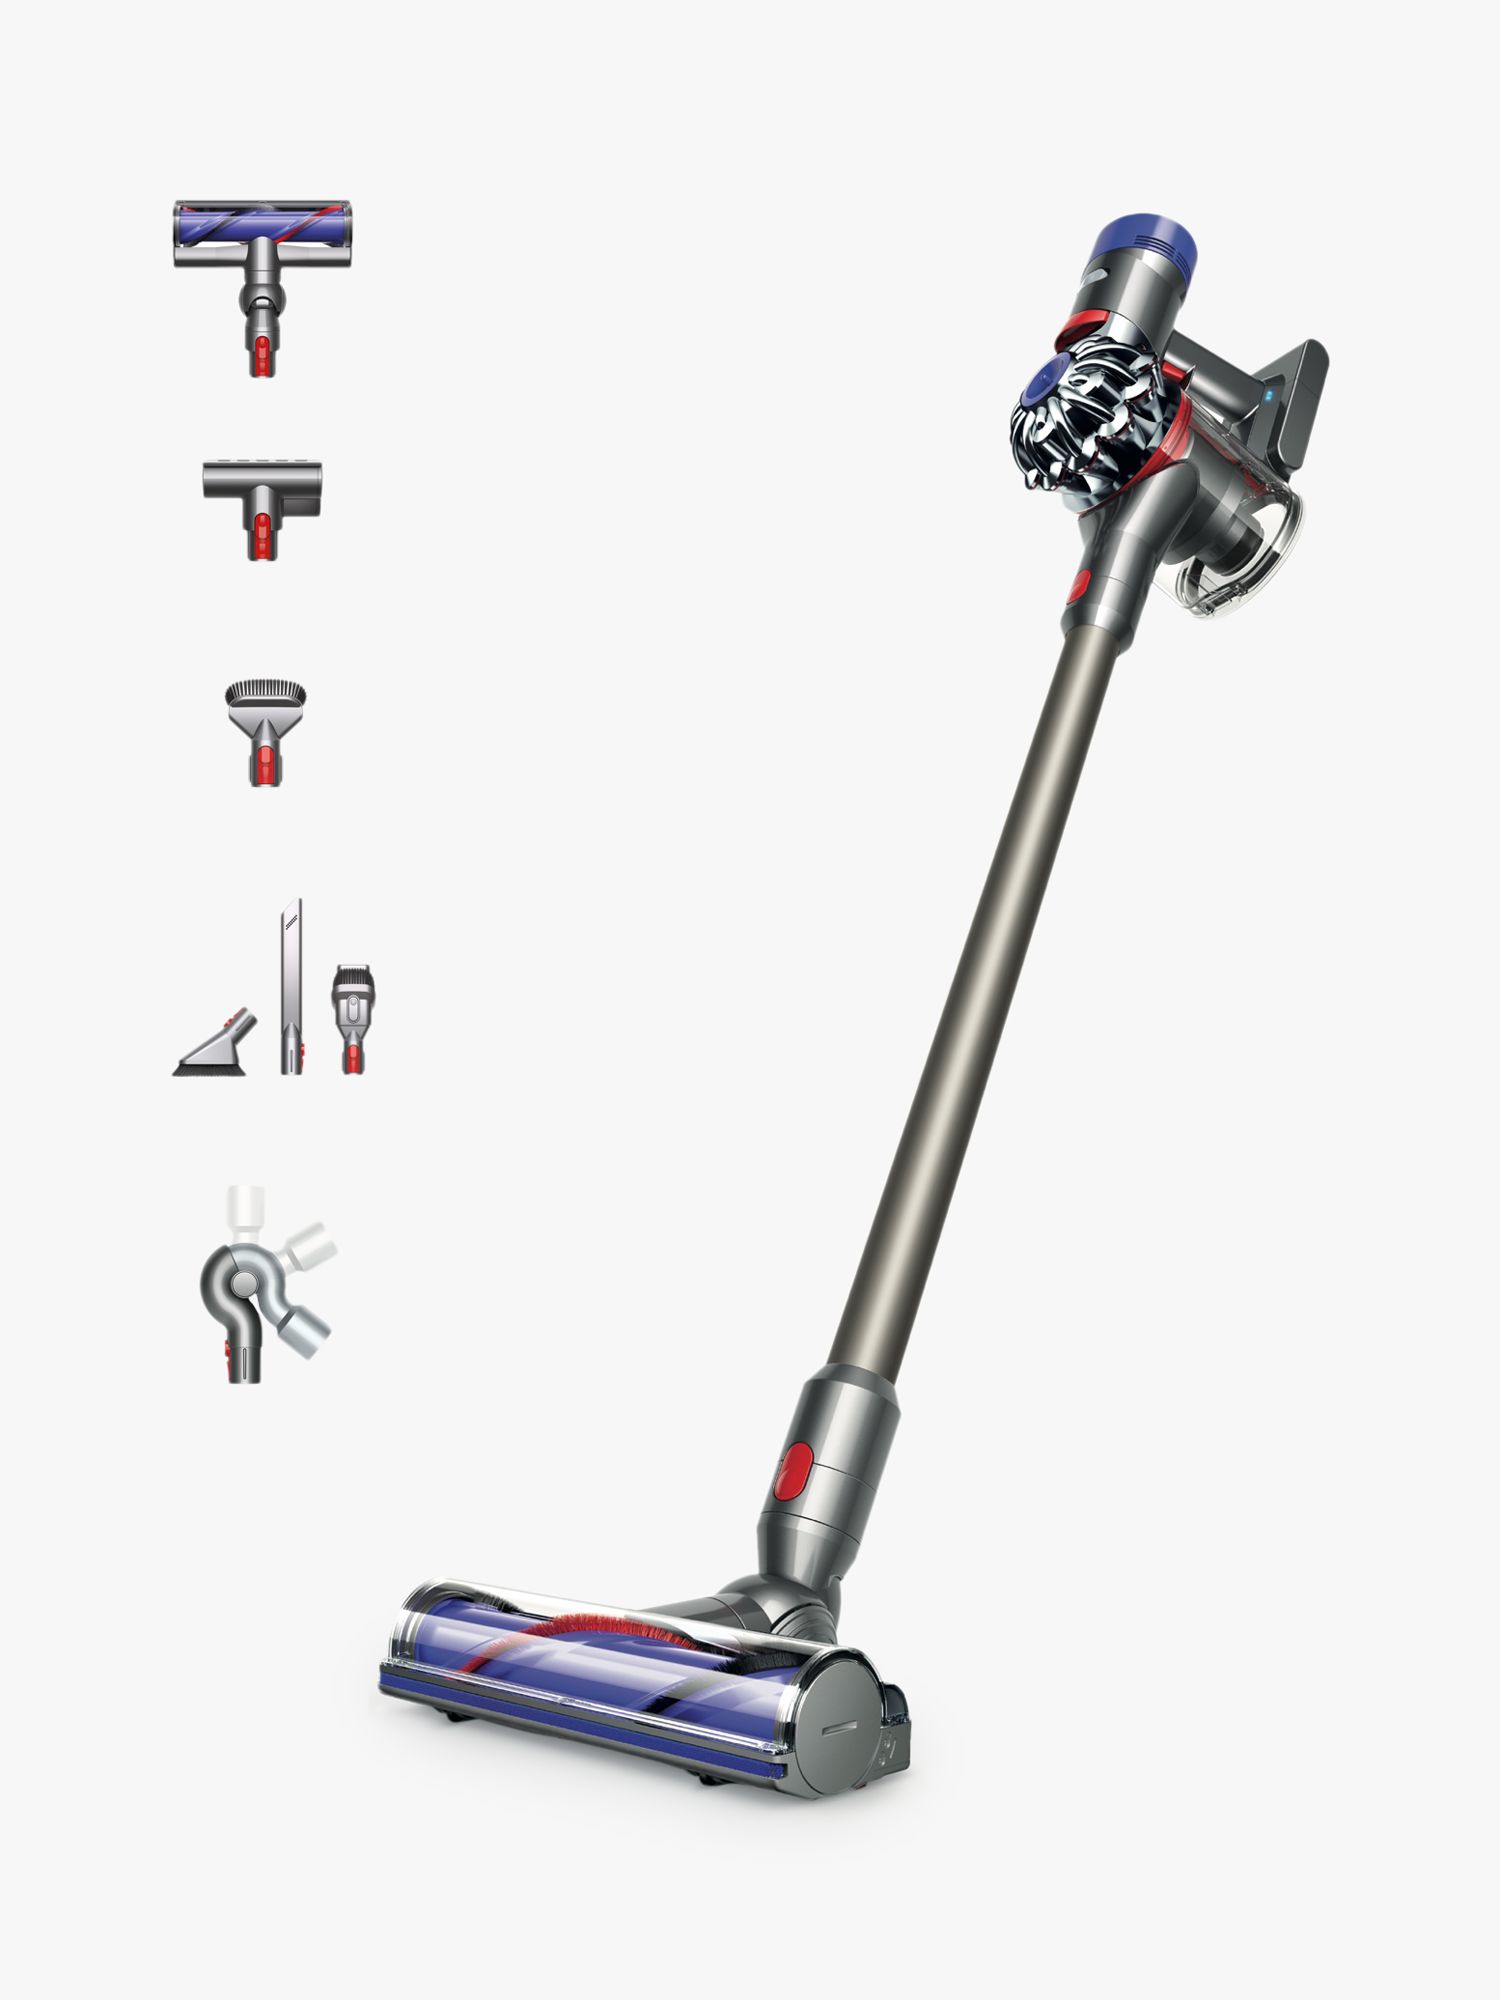 Buy Dyson V8 Animal Complete Cordless Vacuum Cleaner Online at johnlewis.com